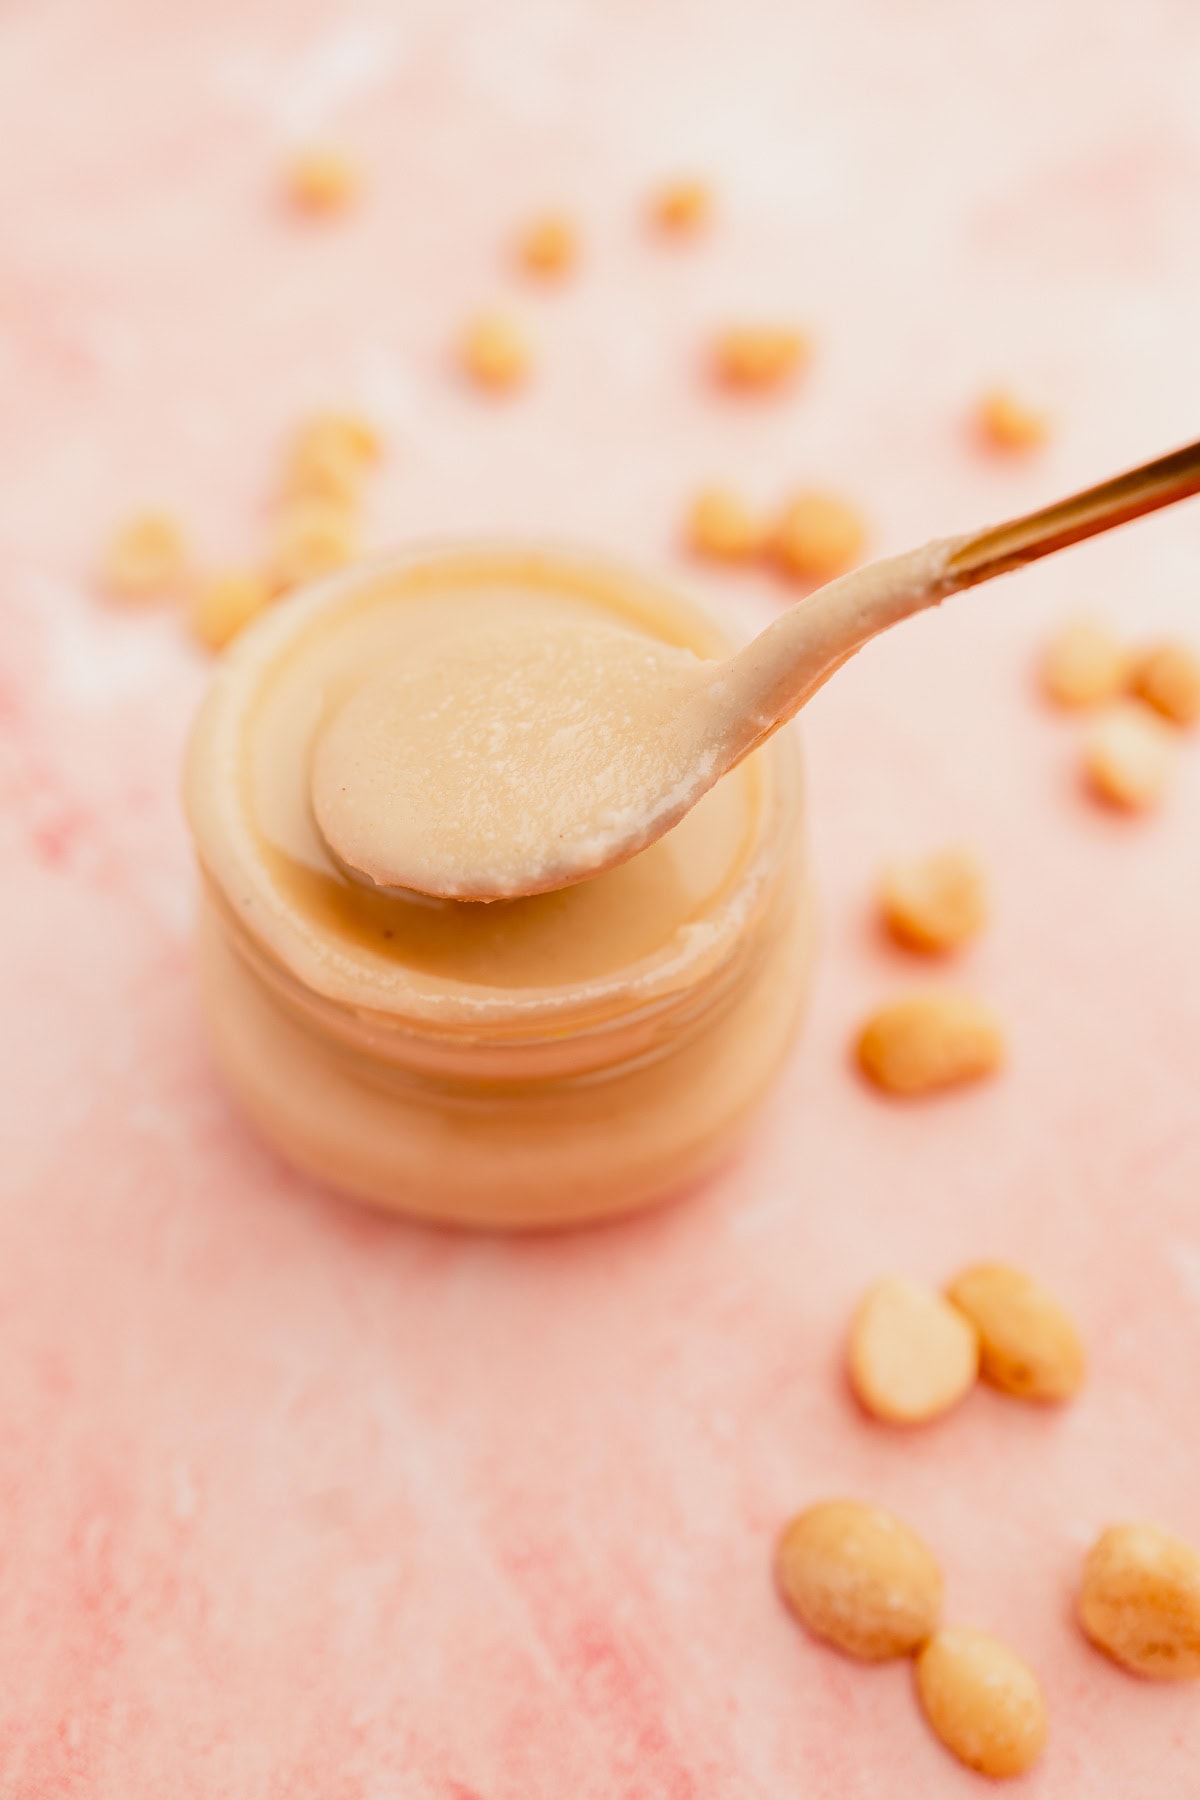 A spoonful of macadamia nut butter over an open jar, with scattered peanuts on a pink background.